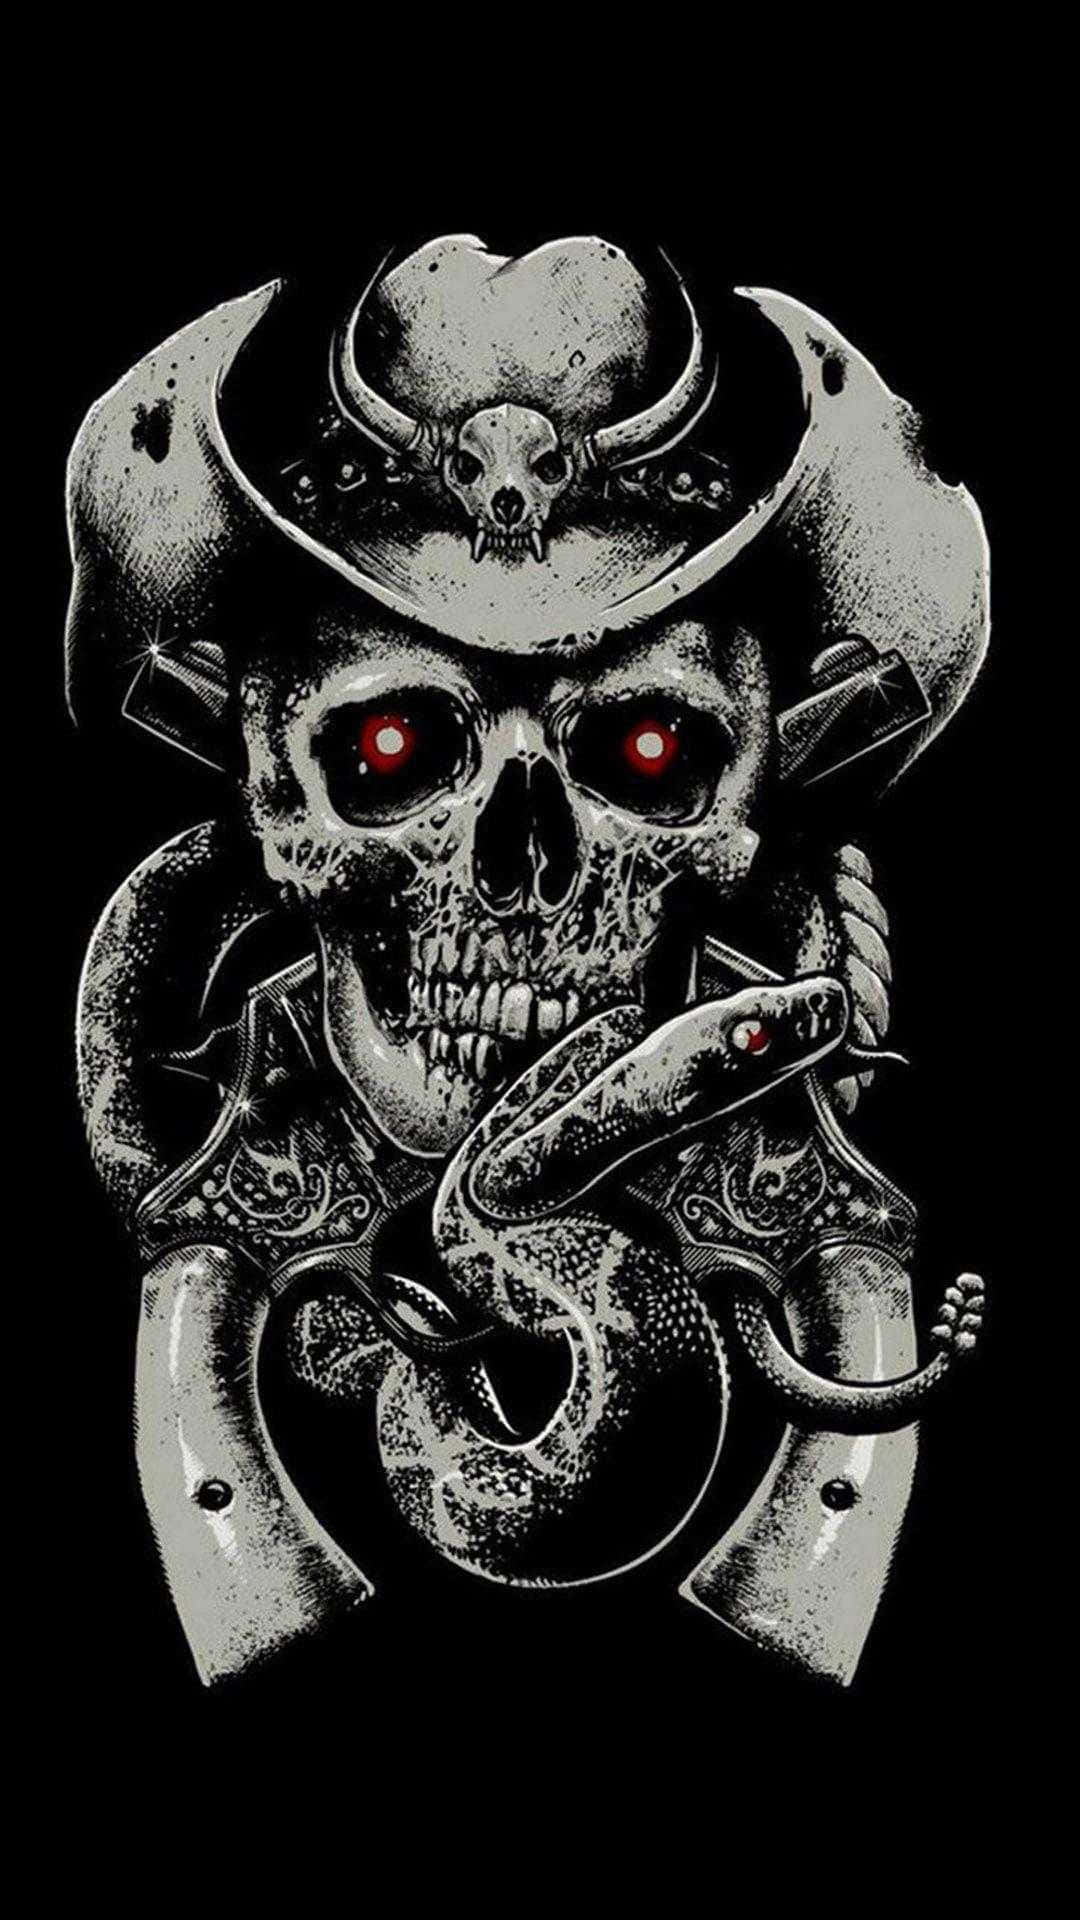 "Dread and Despair in a Glance - The Evil Skull" Wallpaper